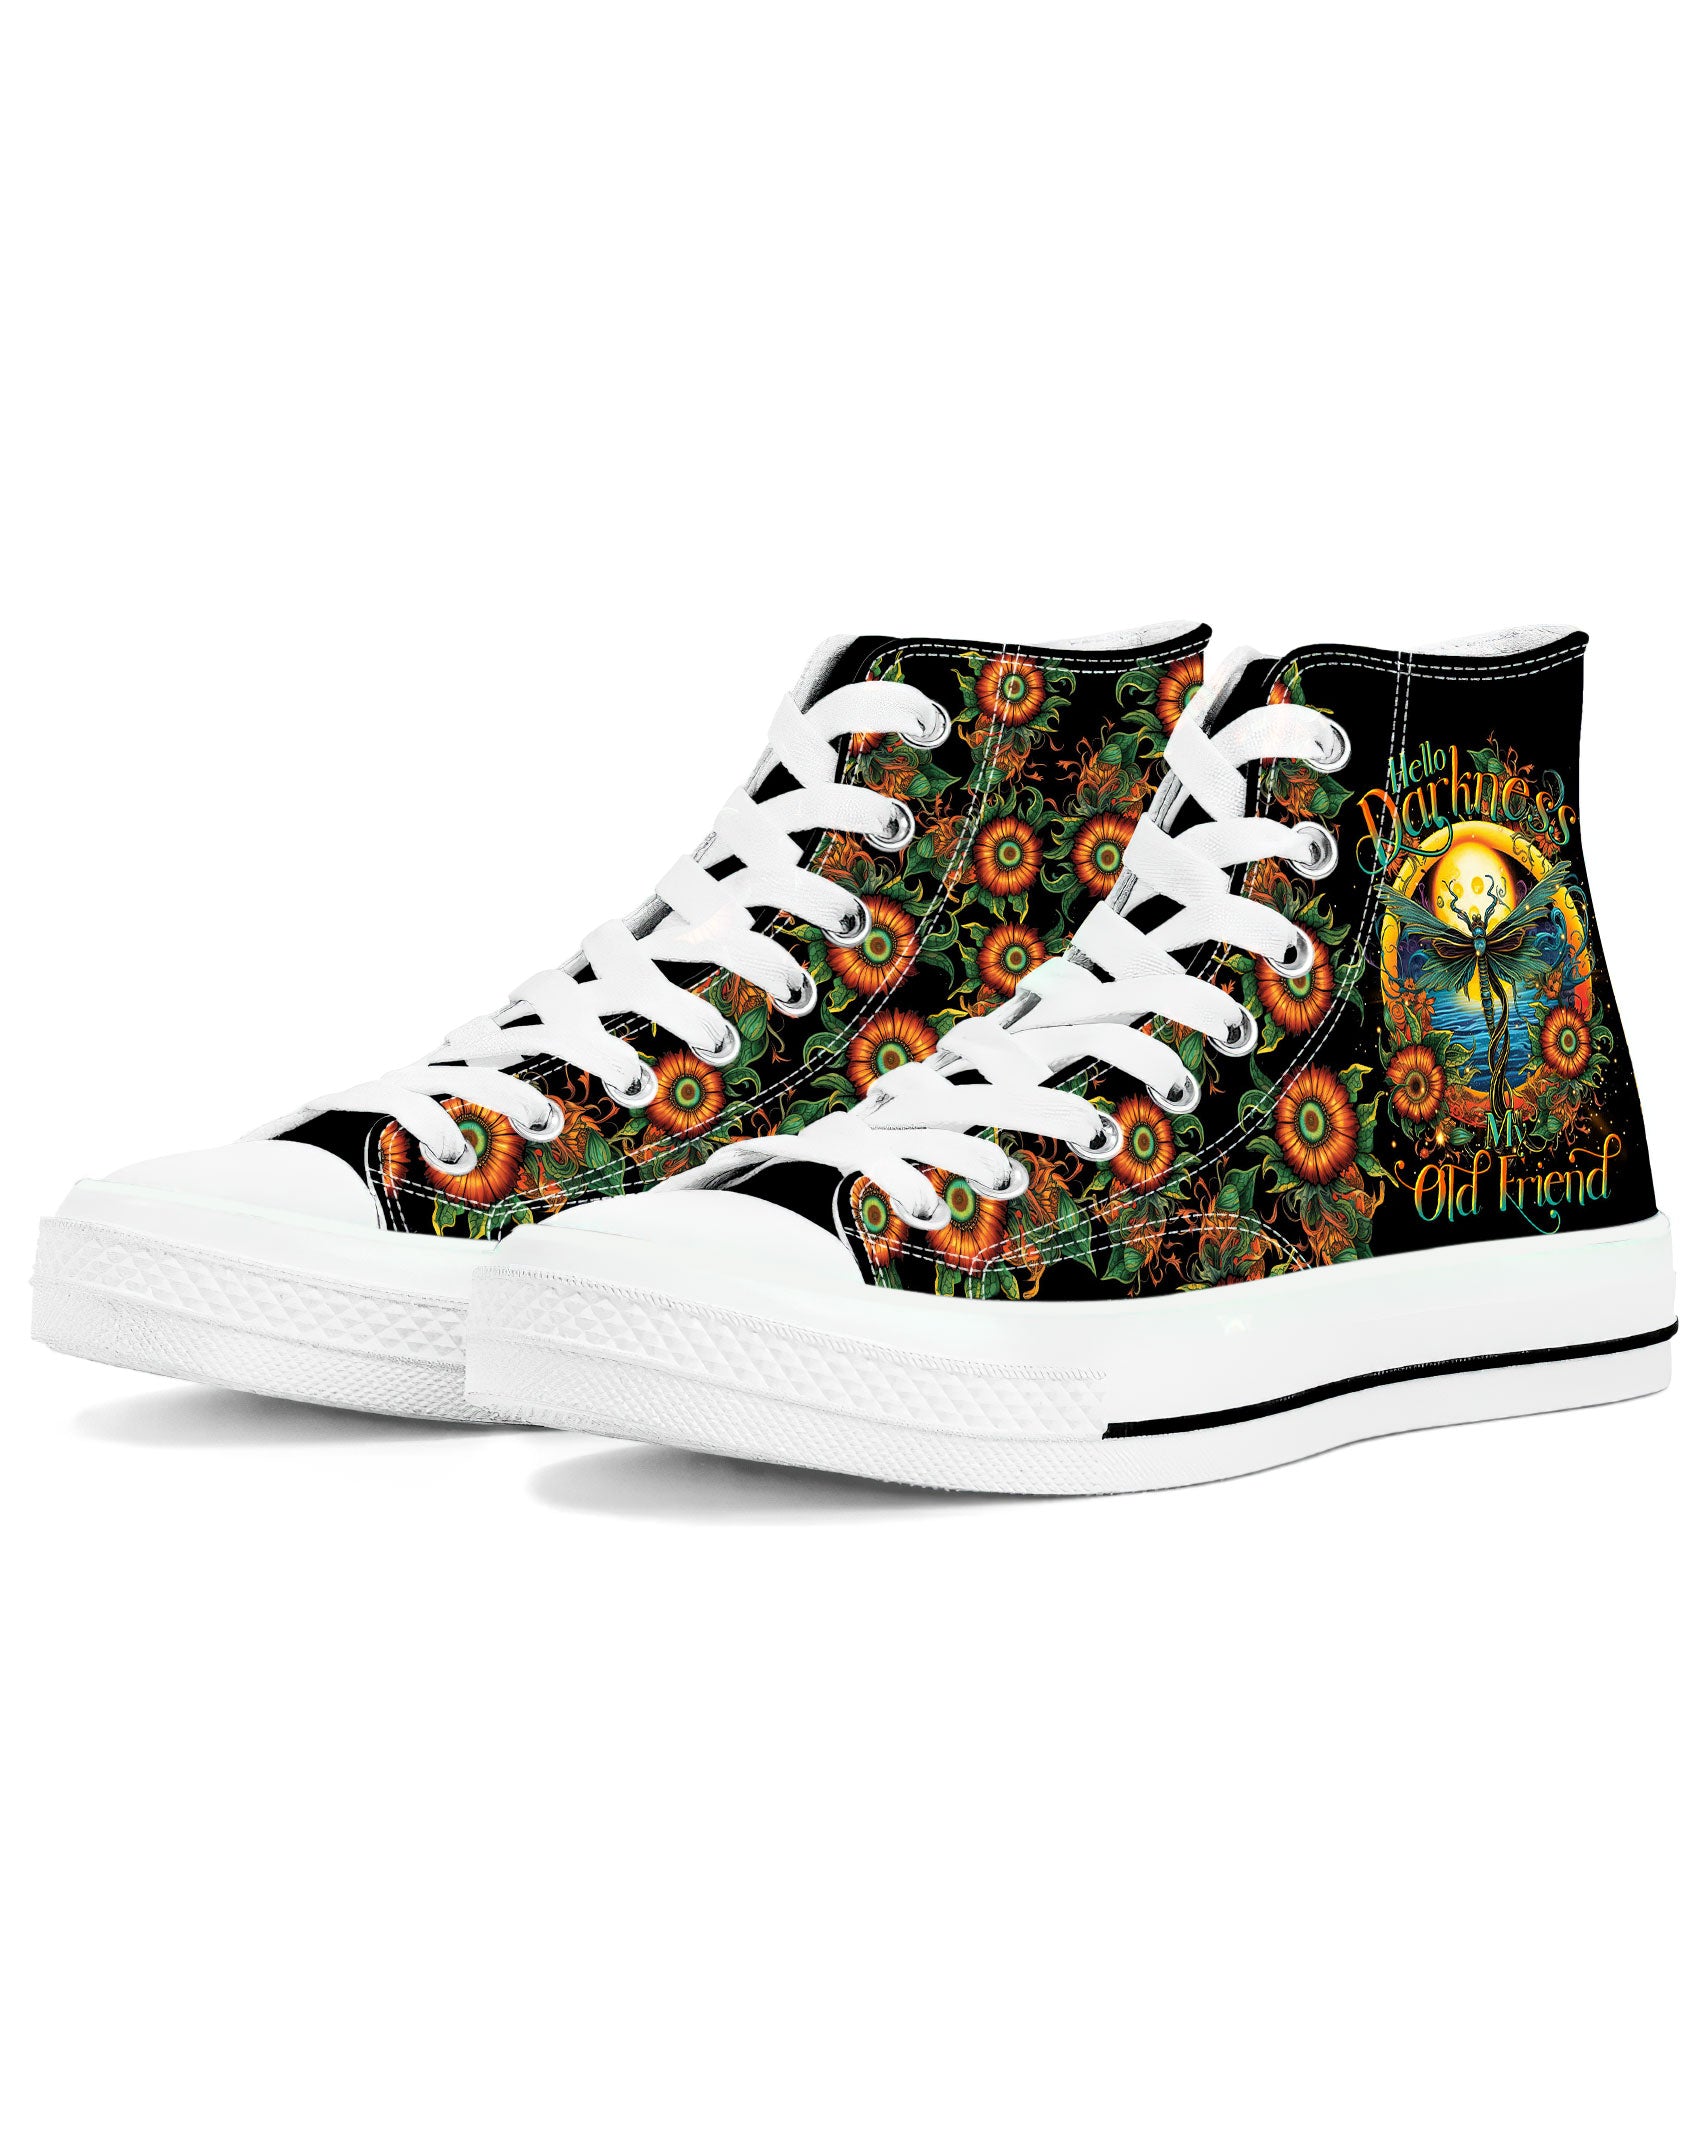 HELLO DARKNESS MY OLD FRIEND DRAGONFLY HIGH TOP CANVAS SHOES - TLTR1007233